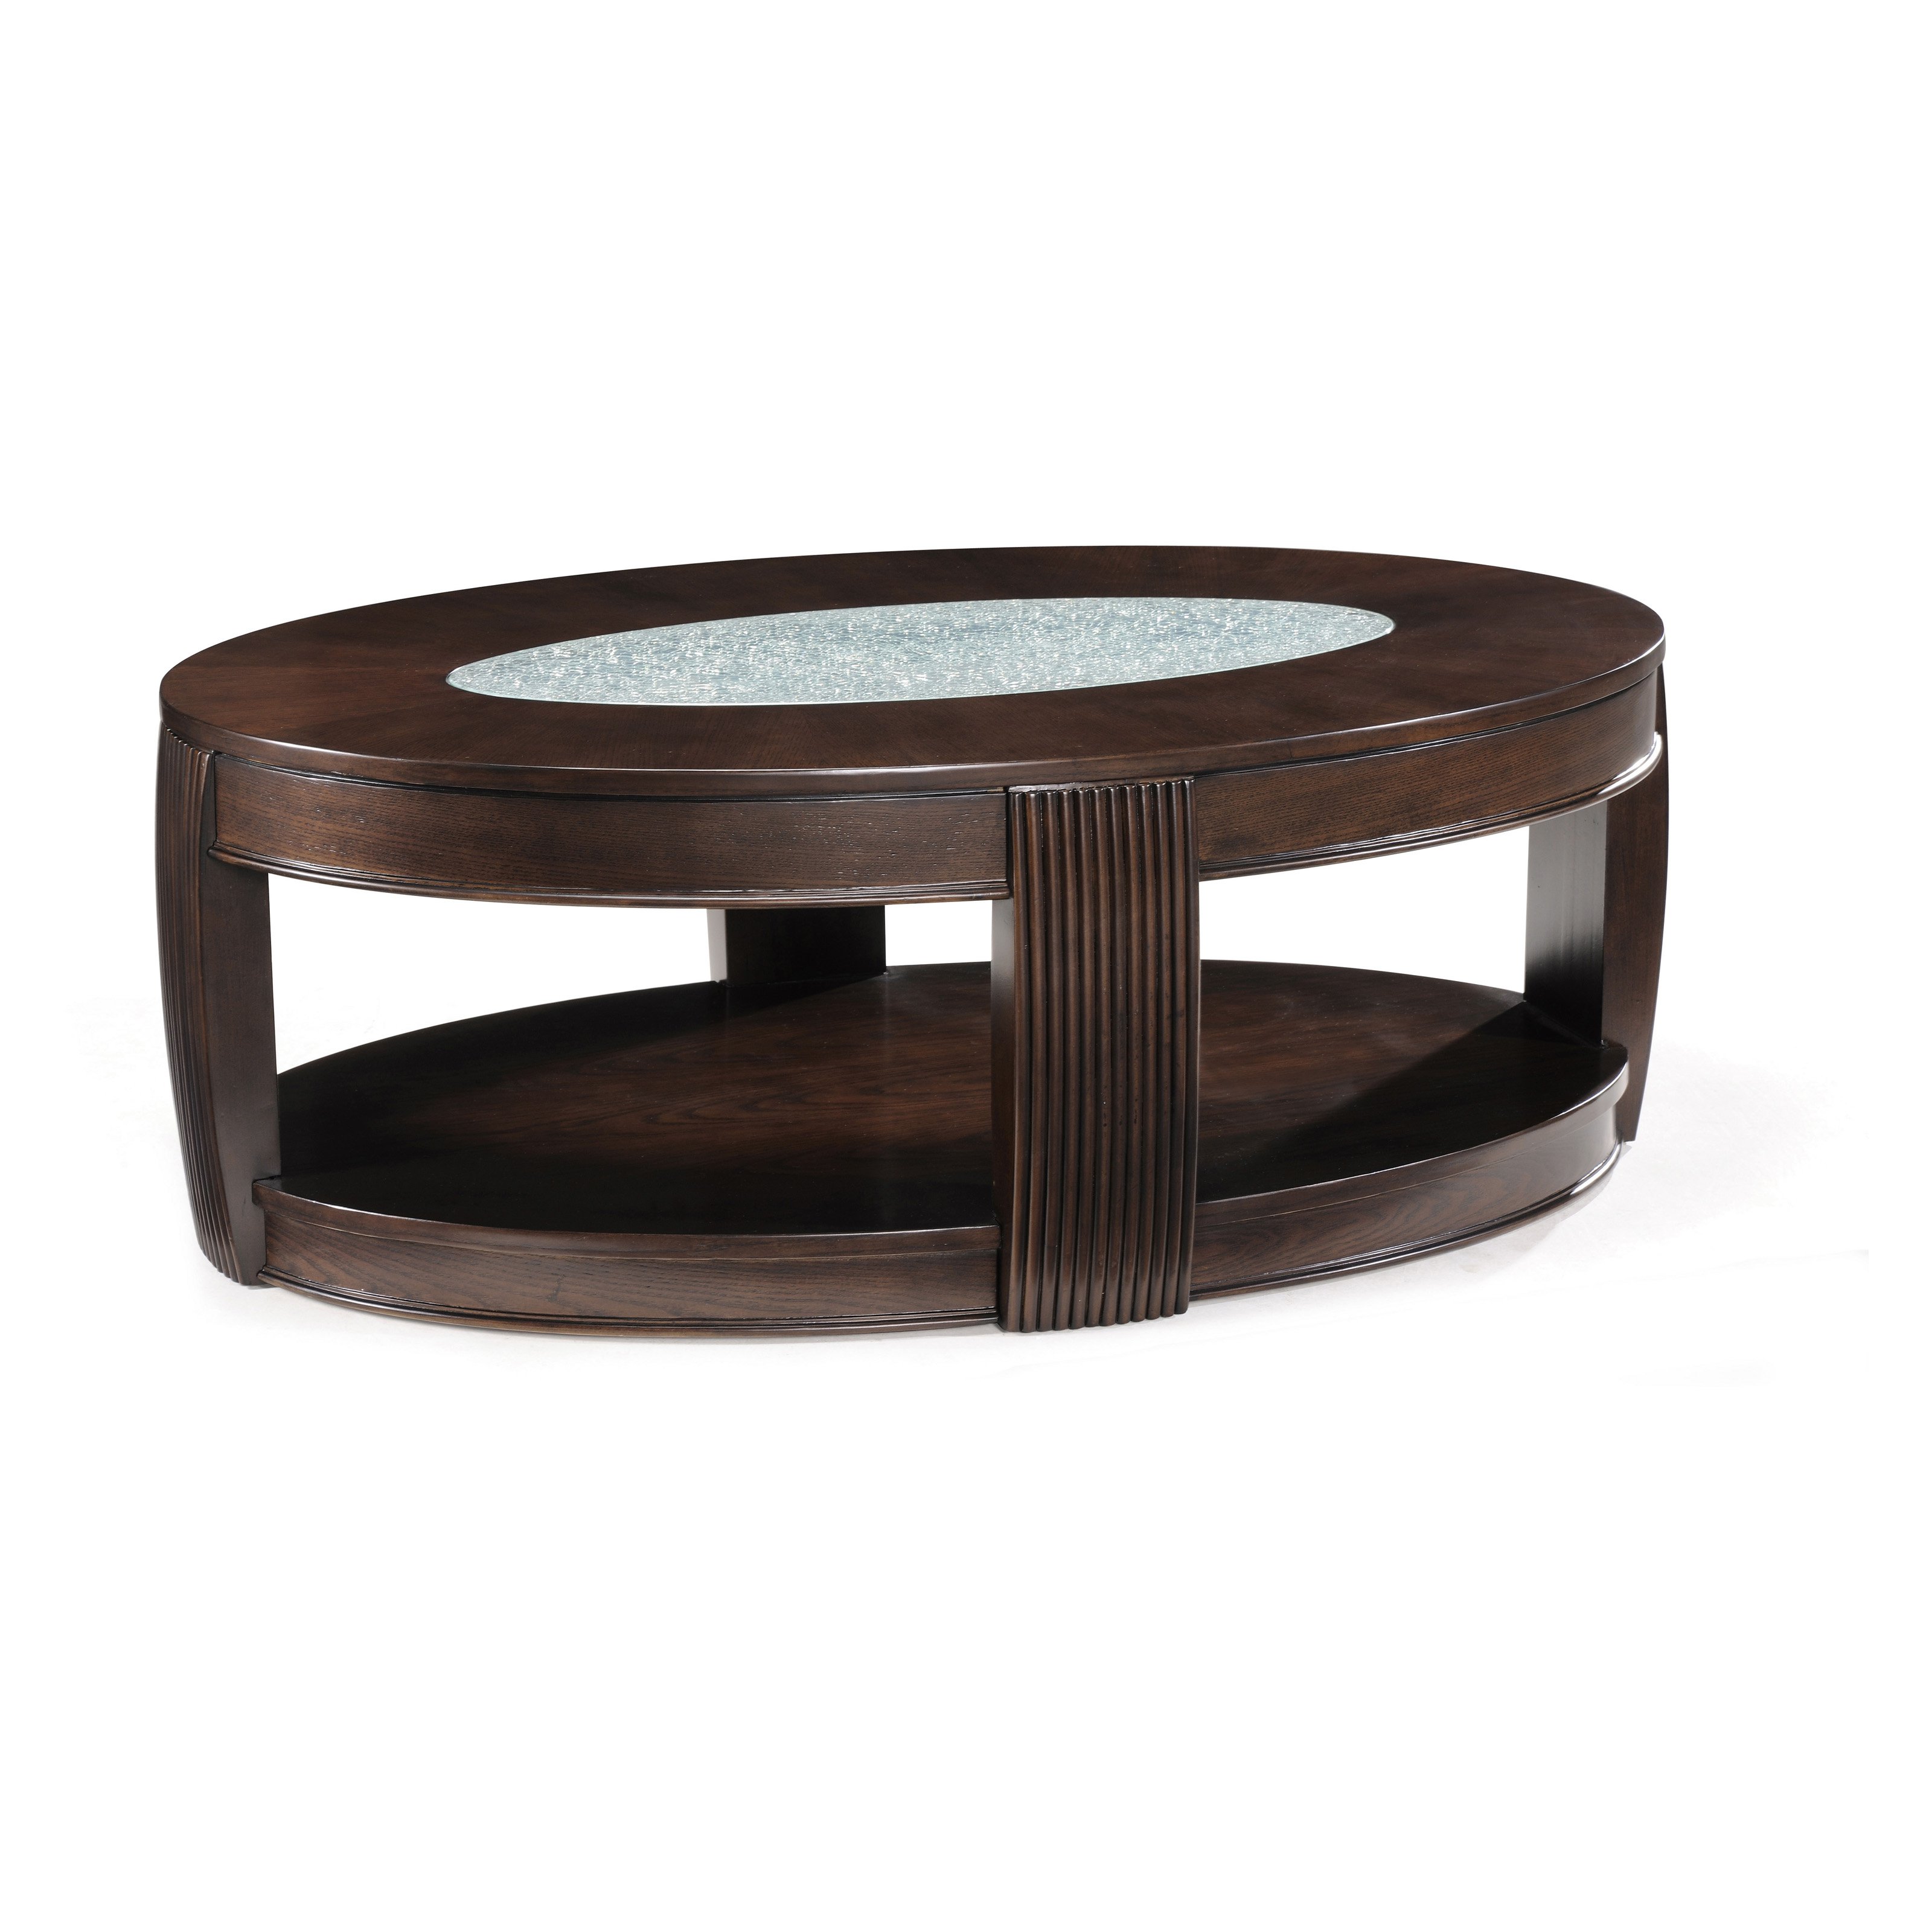 small glass top end tables free size round table low accent decorative stands for living room black gold coffee reclaimed wood furniture los angeles teak sydney couch antique